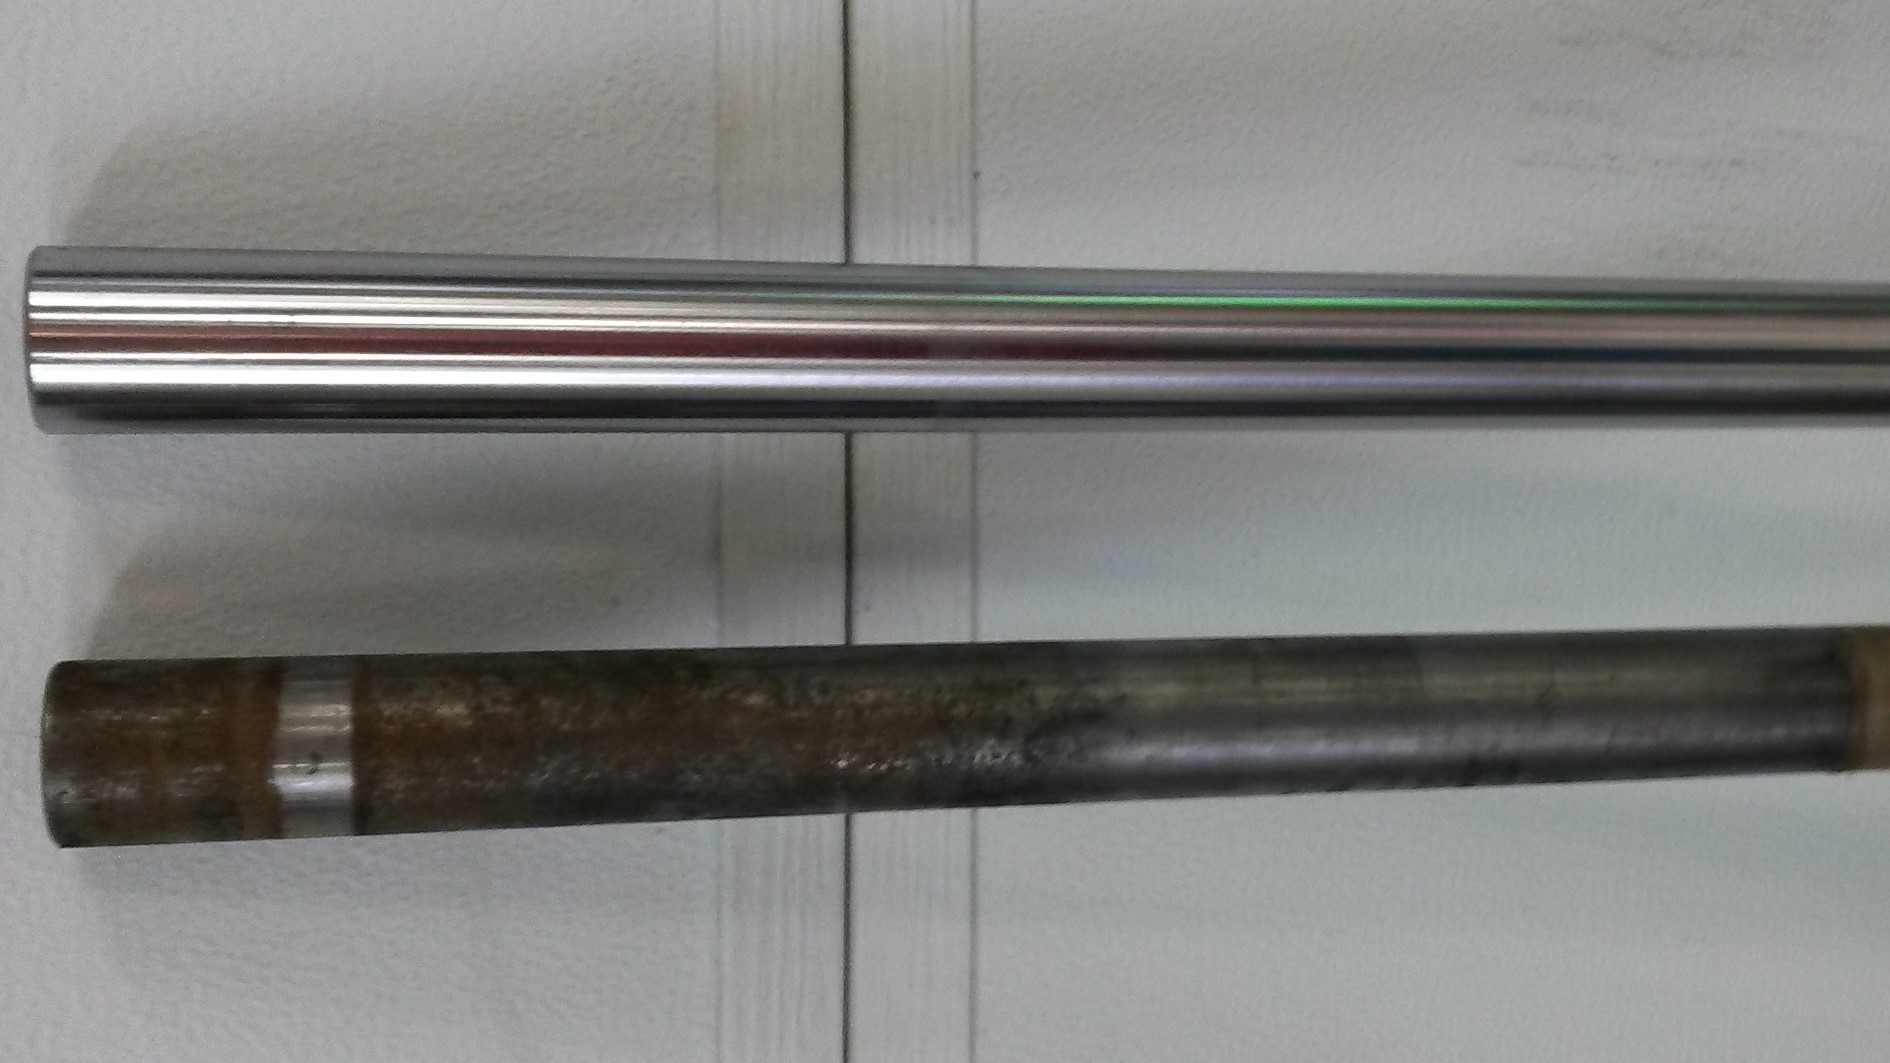 One tube before the other after polishing